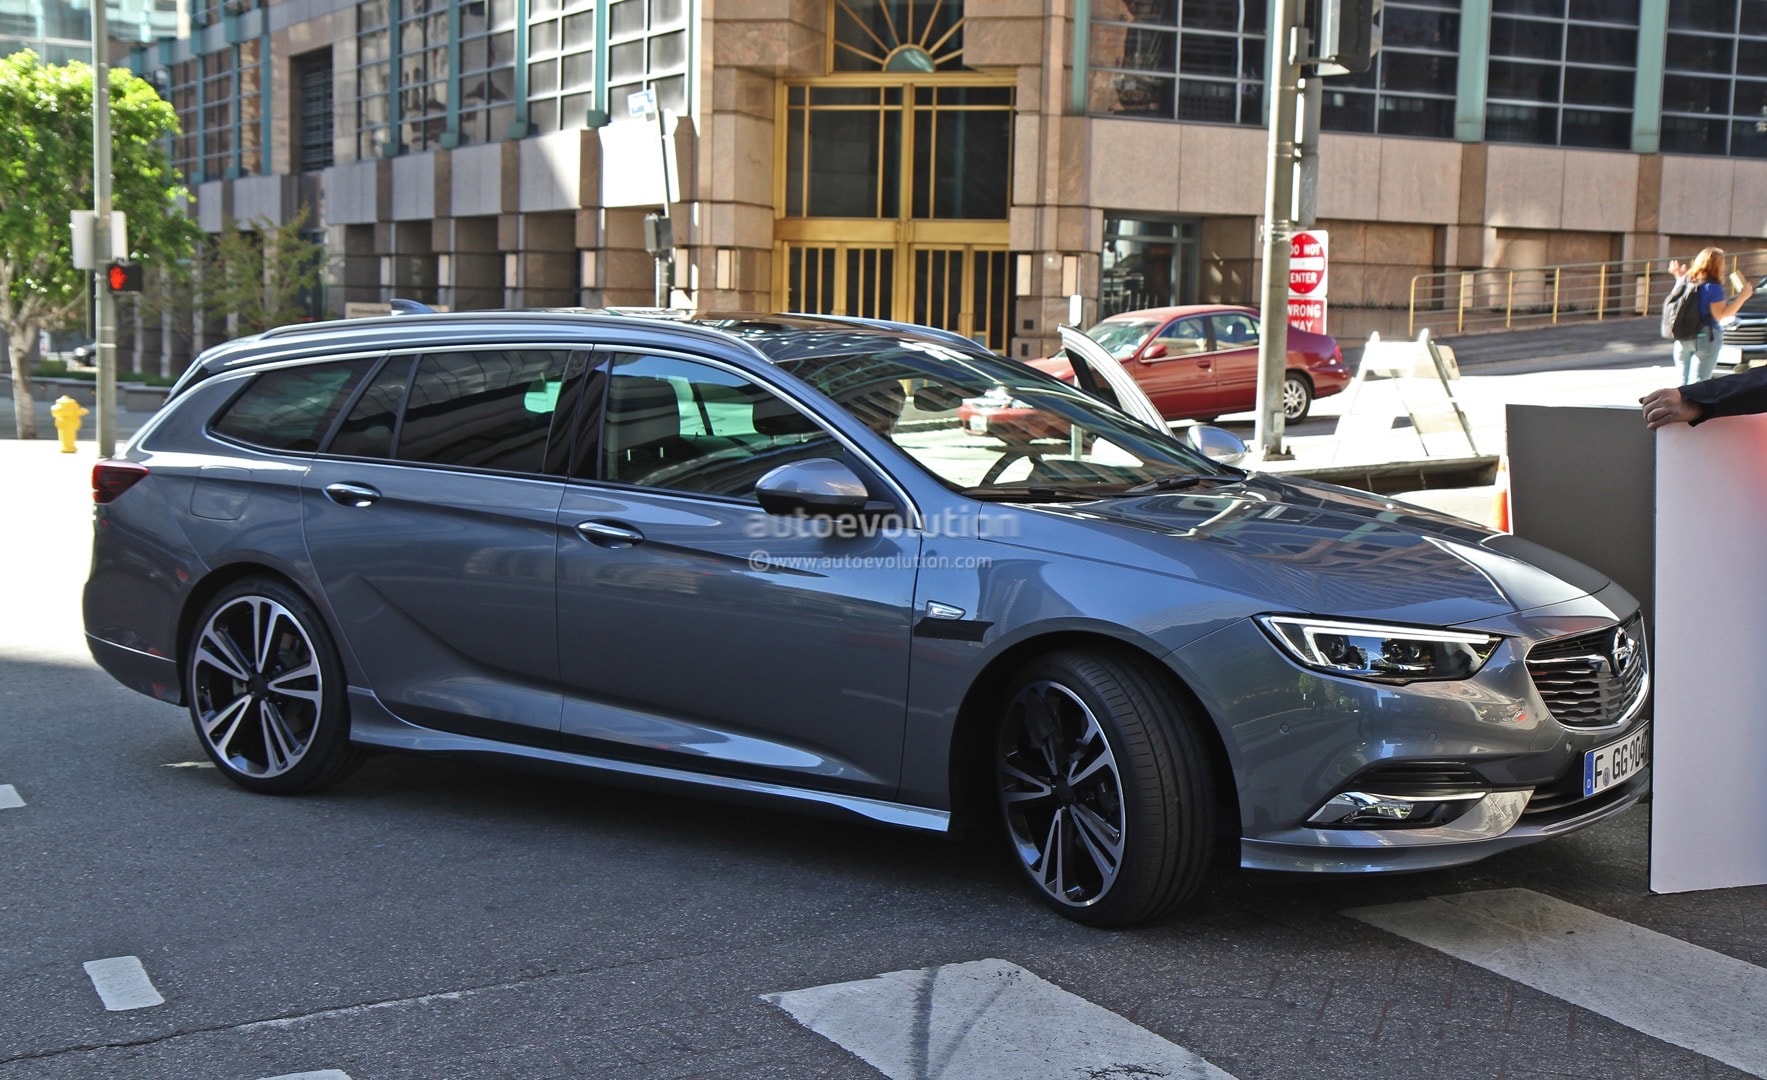 Here's Another Take On The Opel Insignia Grand Sport OPC